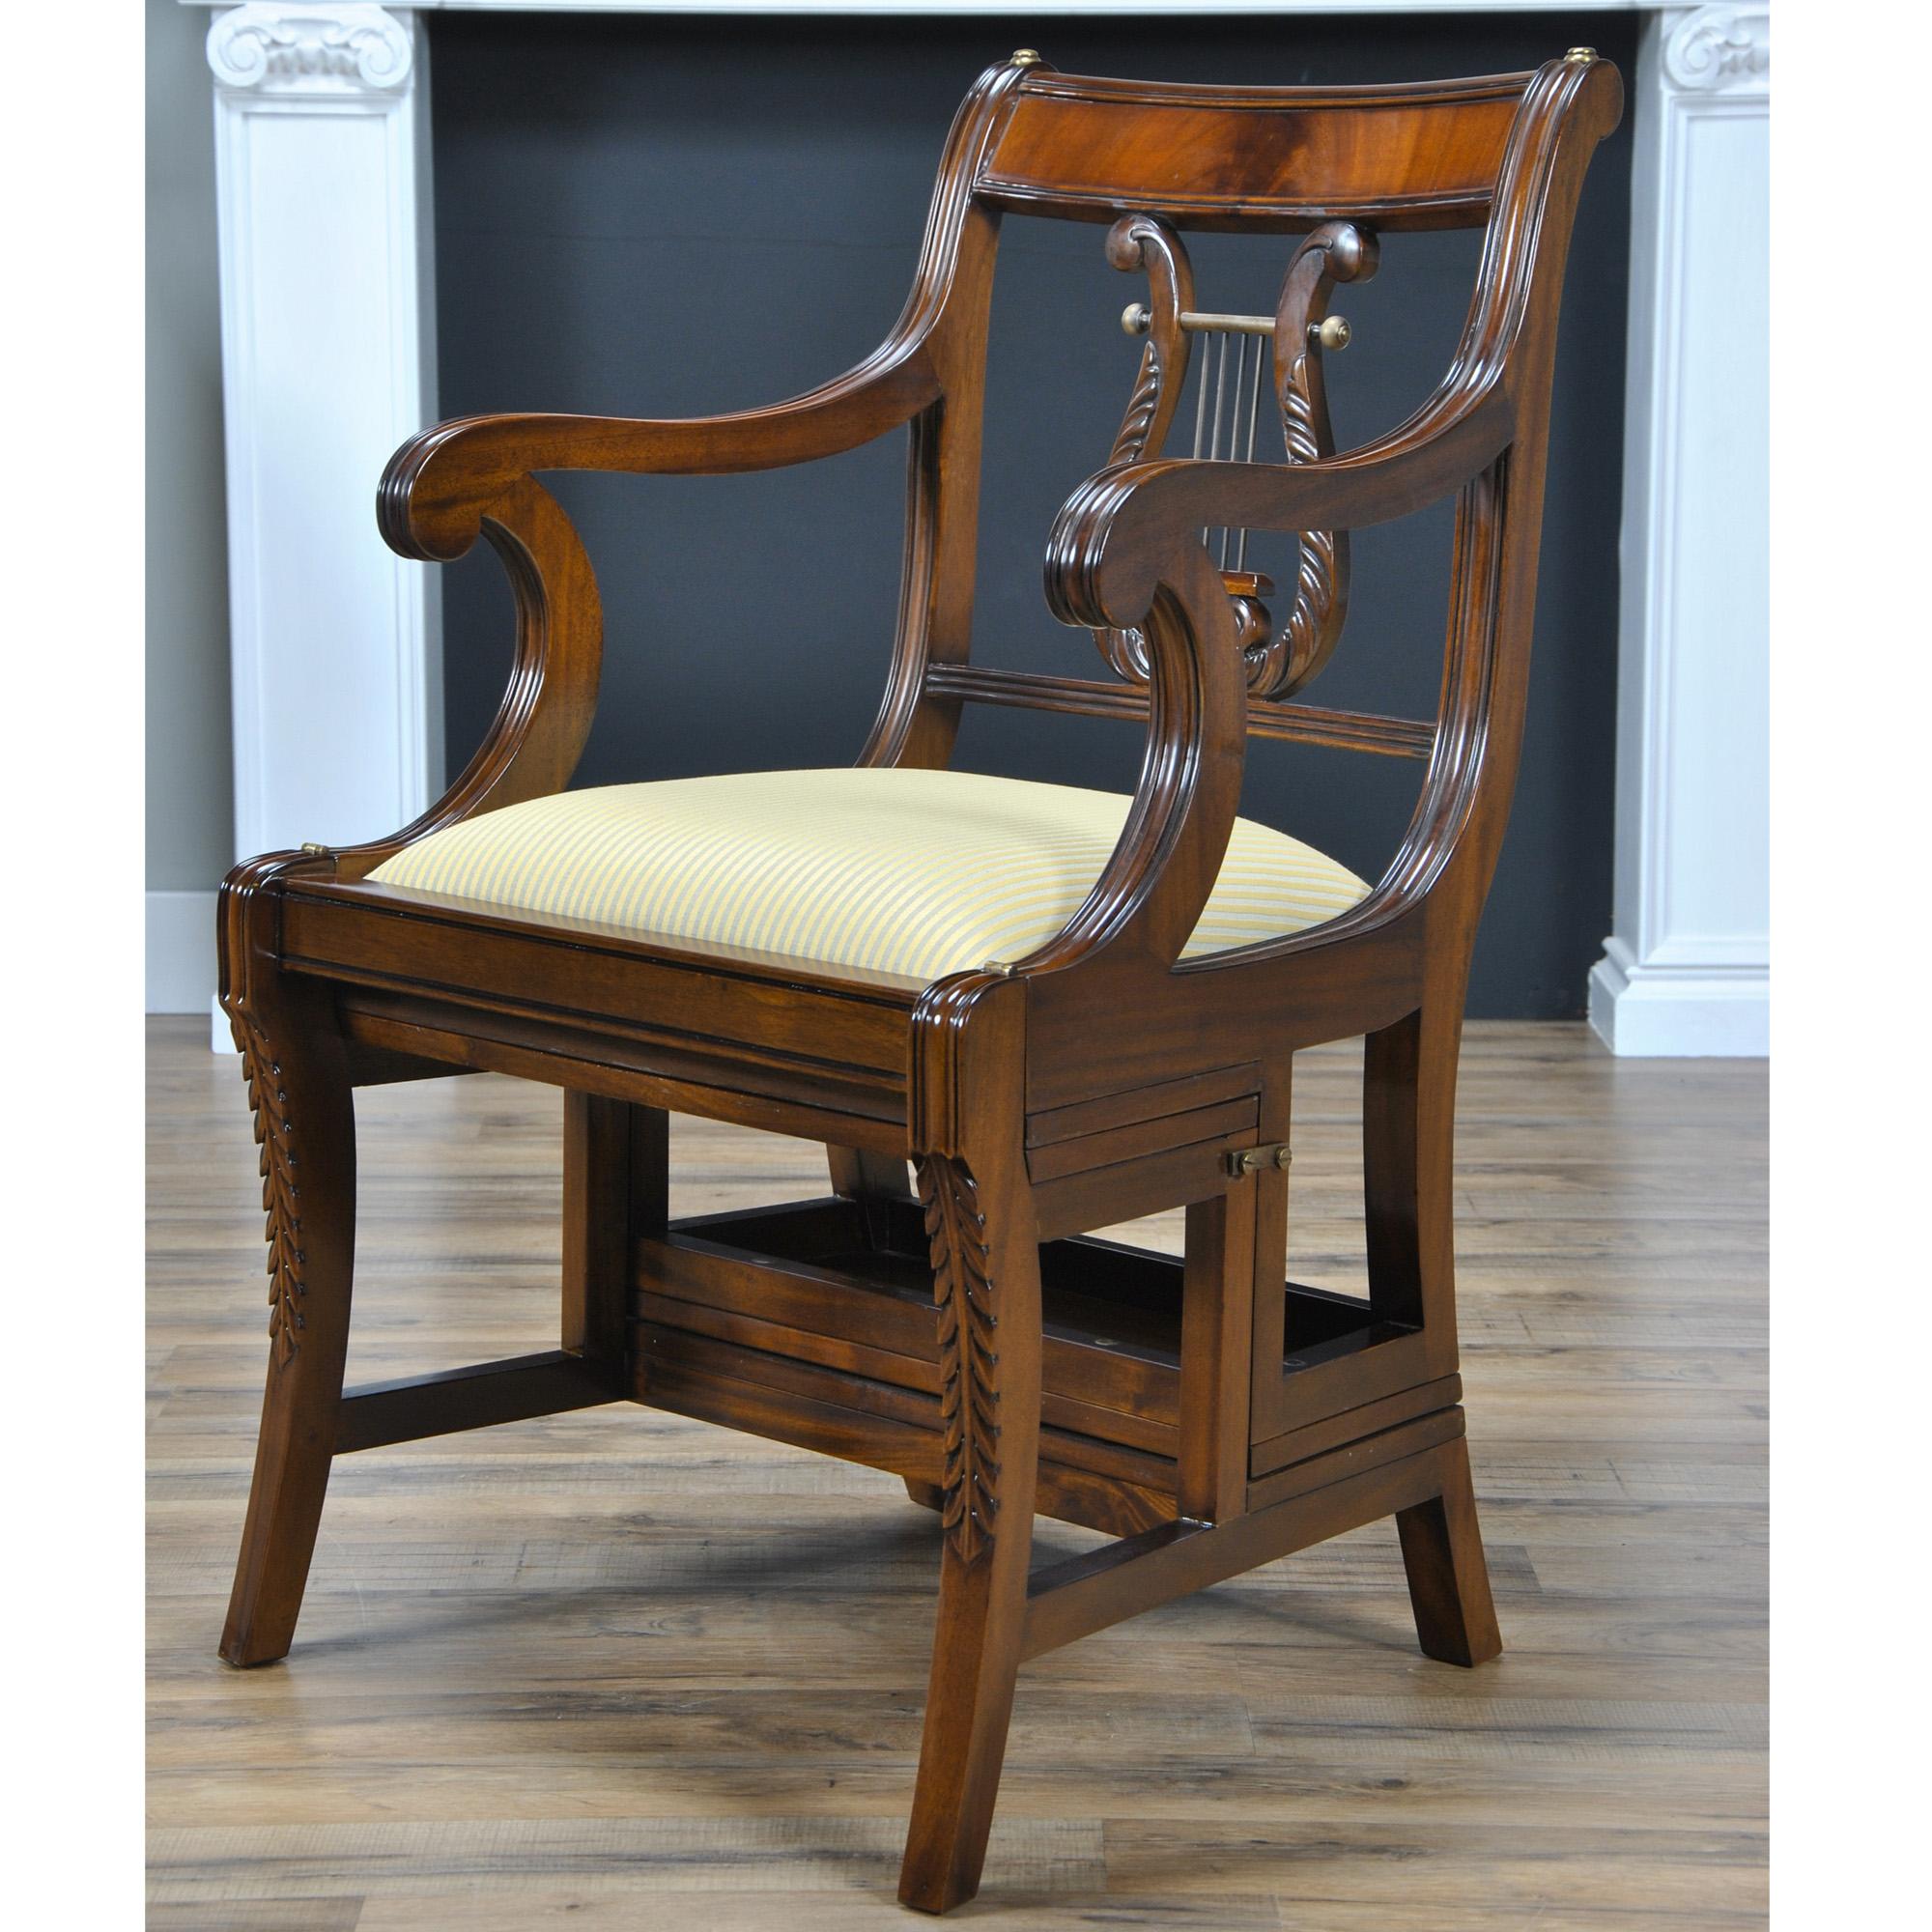 The Mahogany Library Chair, also known as a metamorphic chair as created by Niagara Furniture. This Mahogany Library Chair is produced with a very desirable harp back, also referred to as a lyre back. Originally fashioned for use in the great